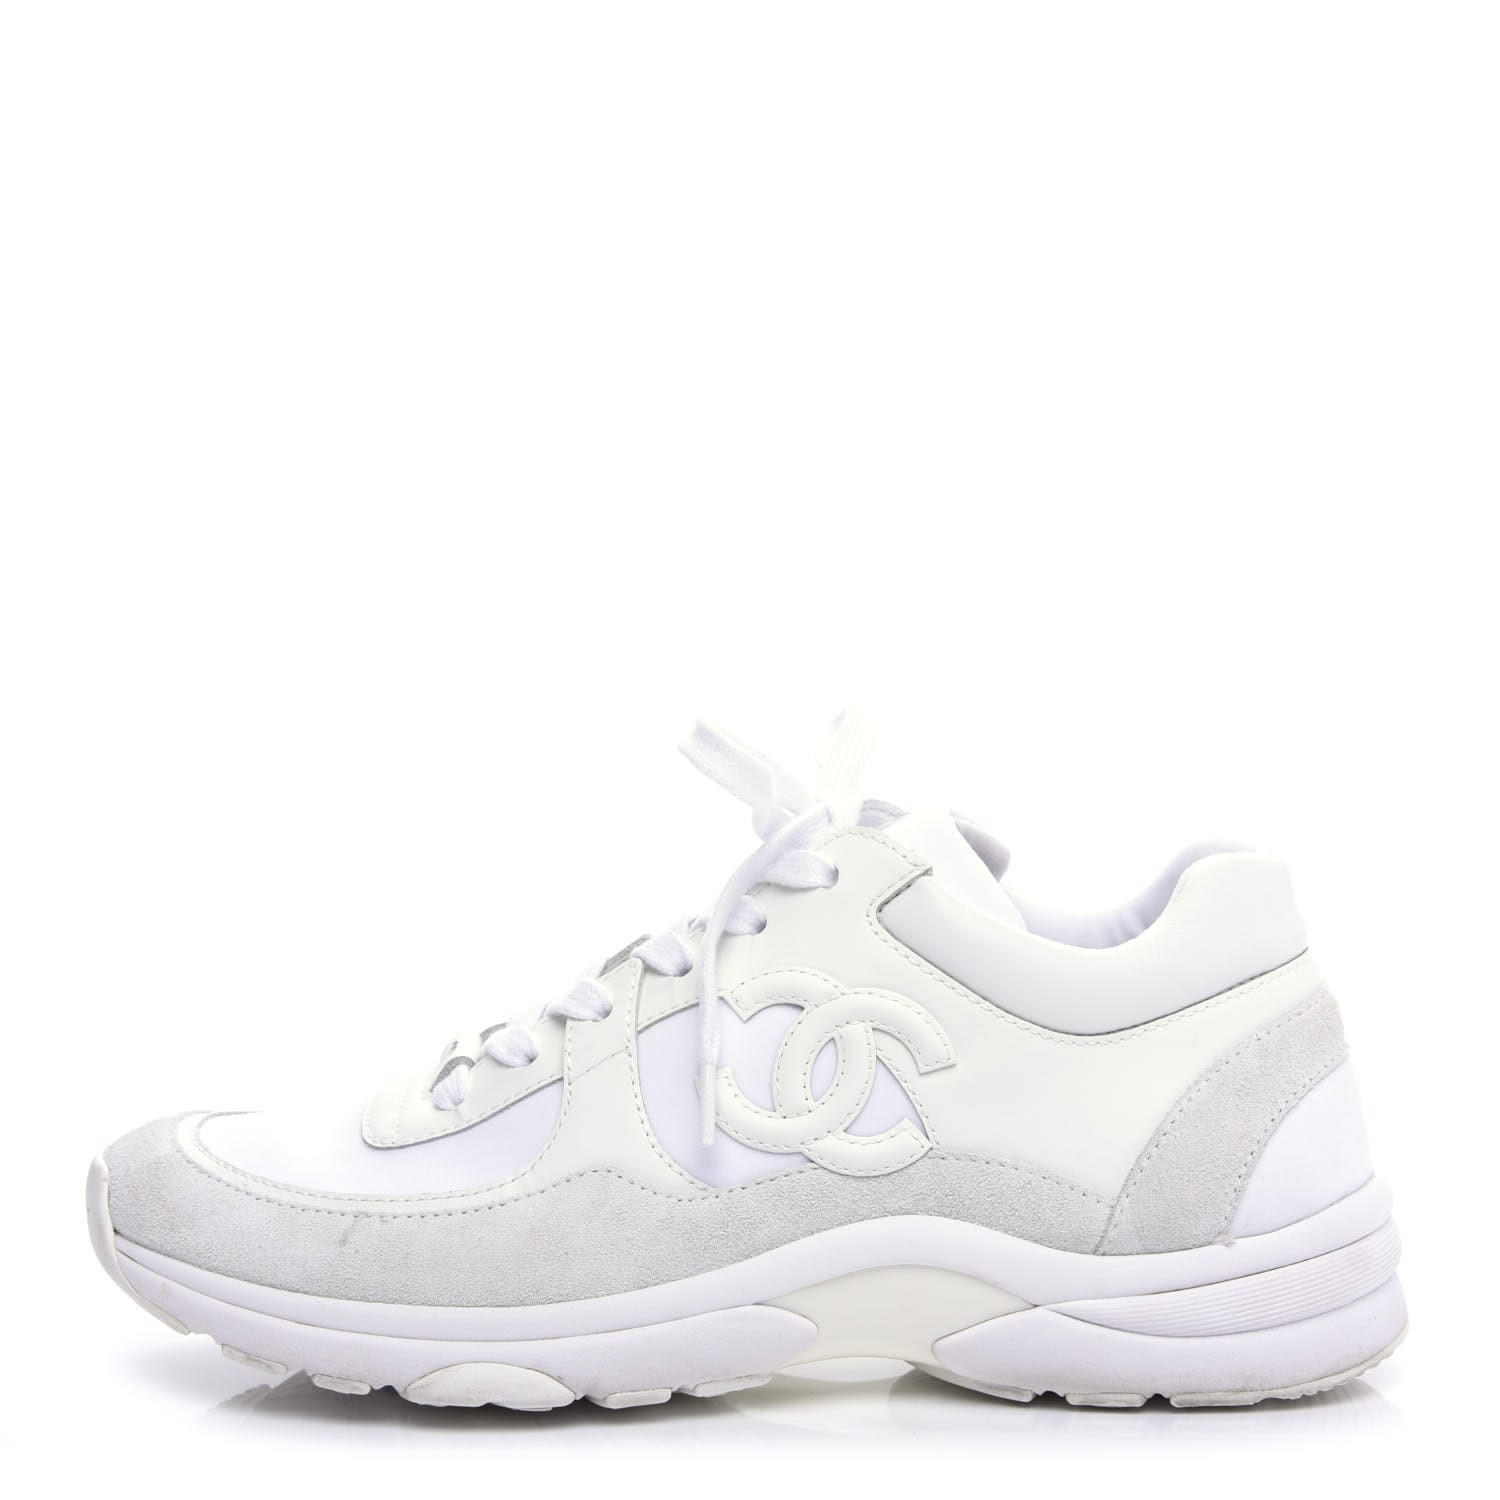 CHANEL Suede Calfskin Fabric CC Sneakers 38.5 White 685378 | FASHIONPHILE